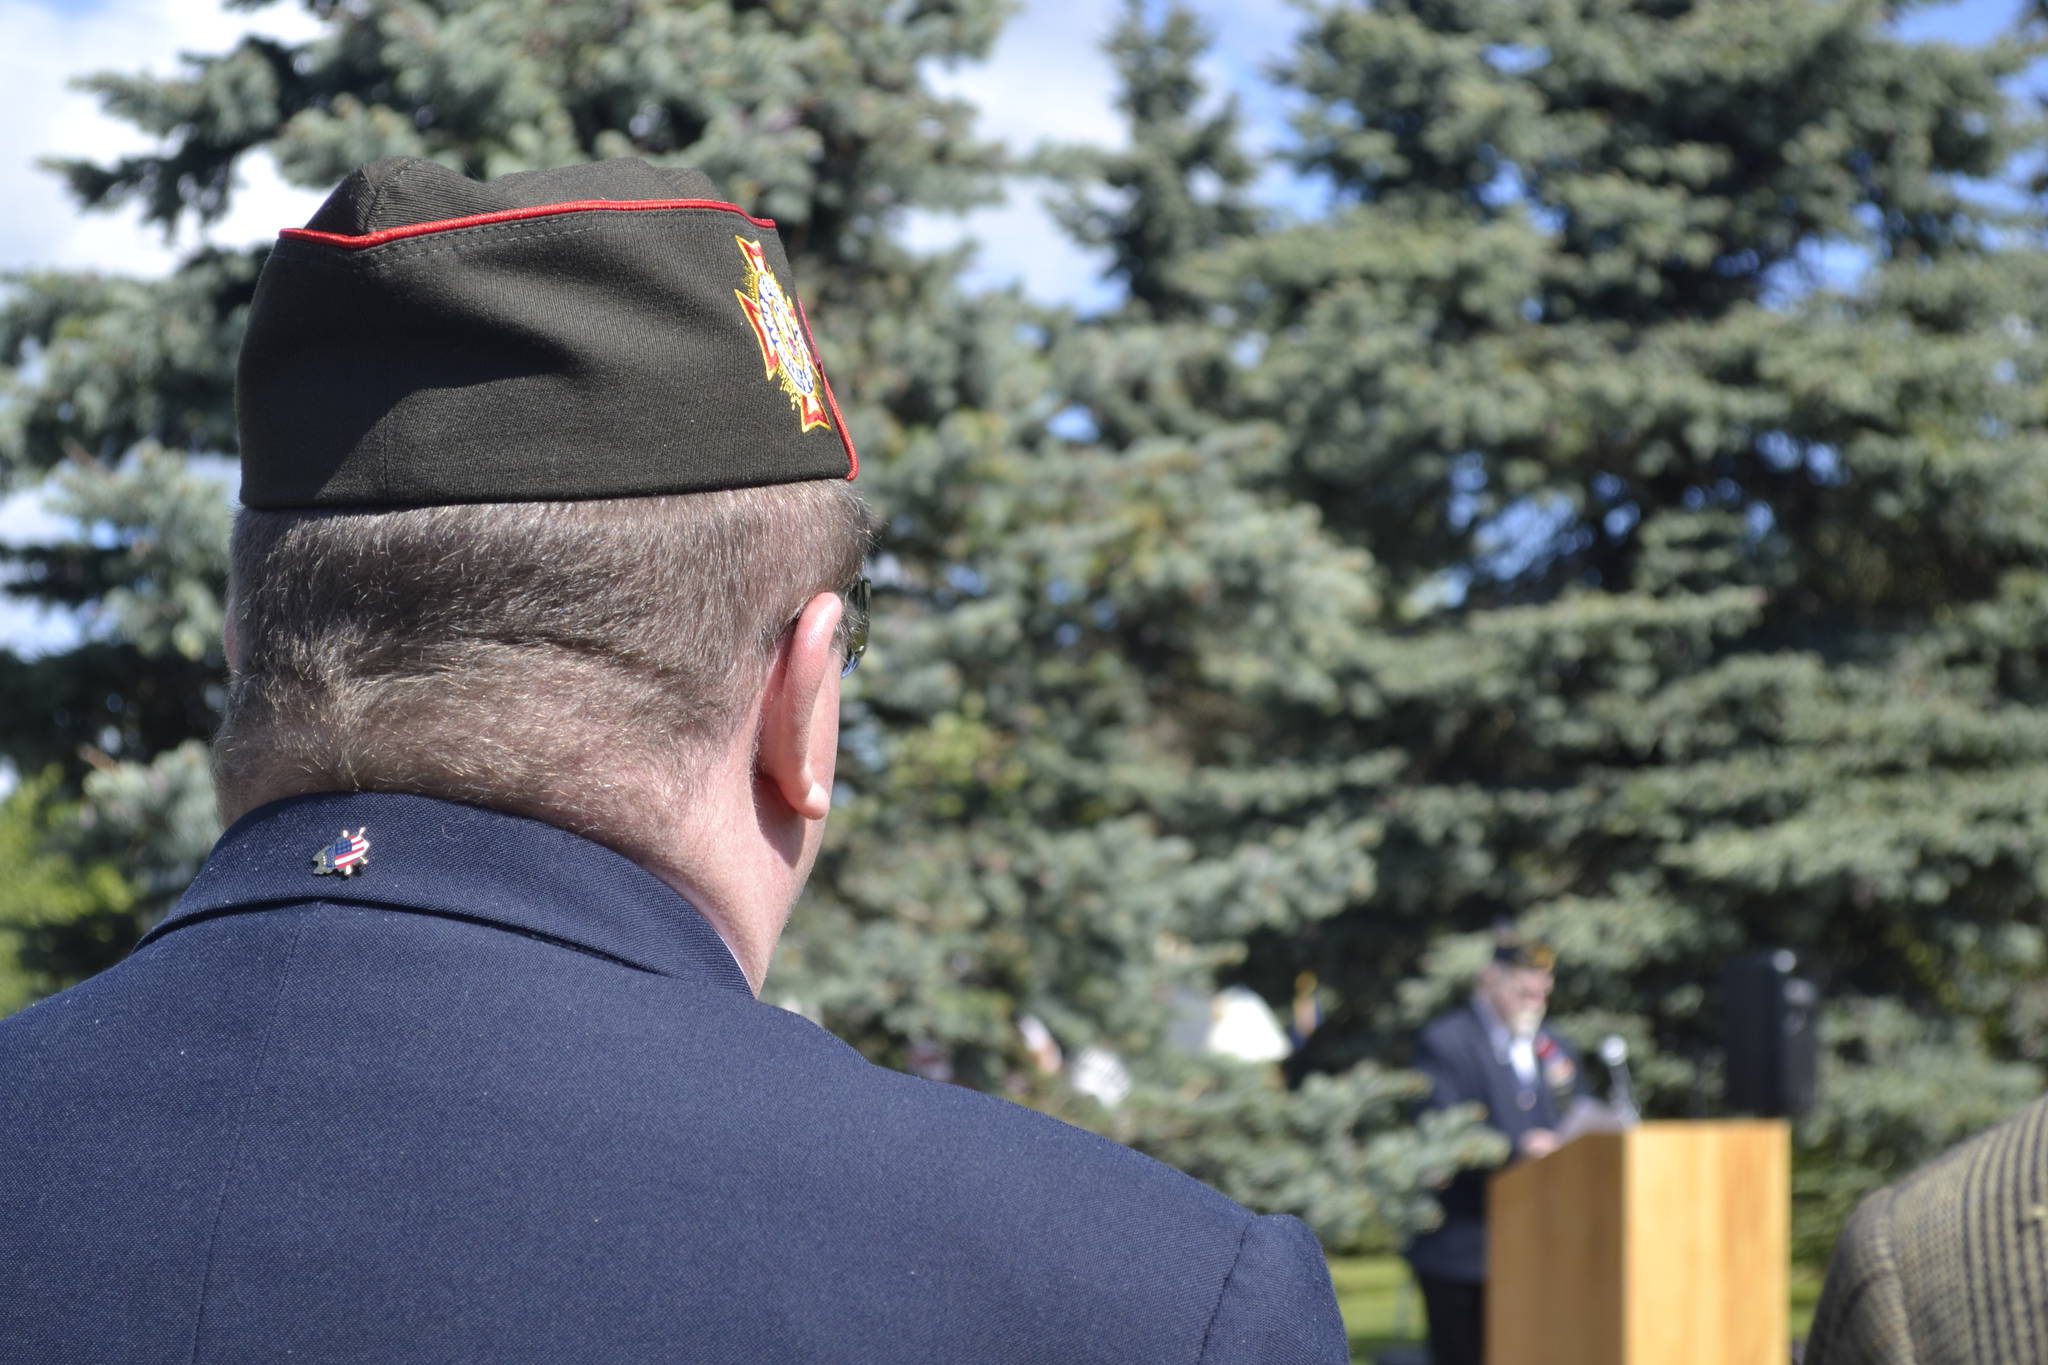 Members of the armed forces gathered to recognize Memorial Day in a ceremony hosted by the Veteran’s Coalition of the Kenai Peninsula on Monday, May 27, 2019, in Leif Hansen Memorial Park in Kenai, Alaska. (Photo by Victoria Petersen/Peninsula Clarion)                                Members of the armed forces gathered to recognize Memorial Day in a ceremony hosted by the Veteran’s Coalition of the Kenai Peninsula on Monday, May 27, 2019, in Leif Hansen Memorial Park in Kenai, Alaska. (Photo by Victoria Petersen/Peninsula Clarion)